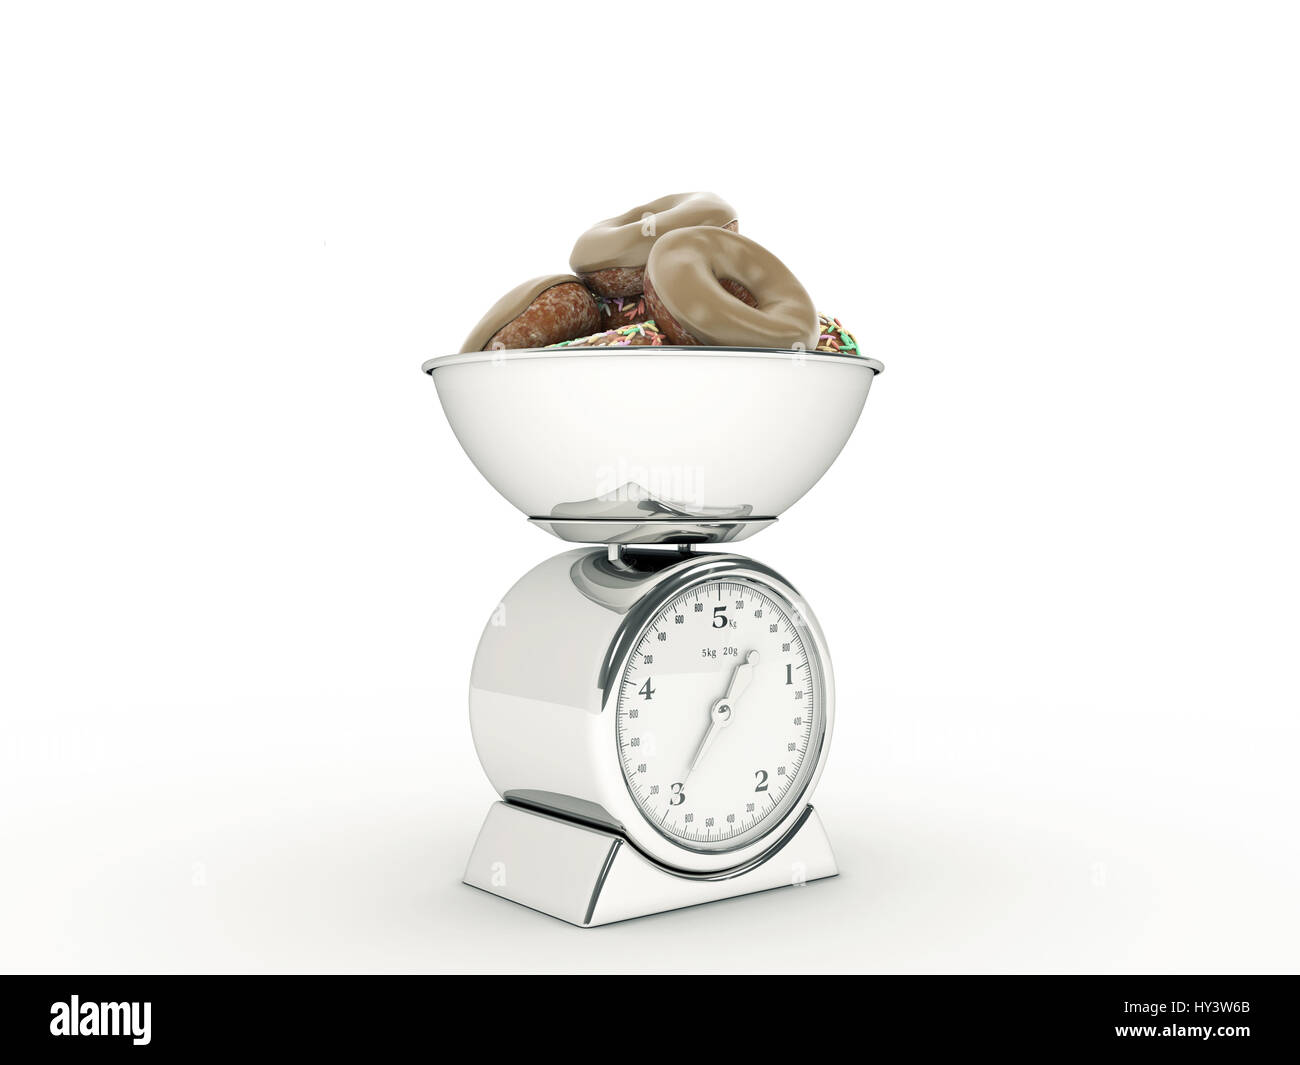 kitchen scale with giant donut Stock Photo